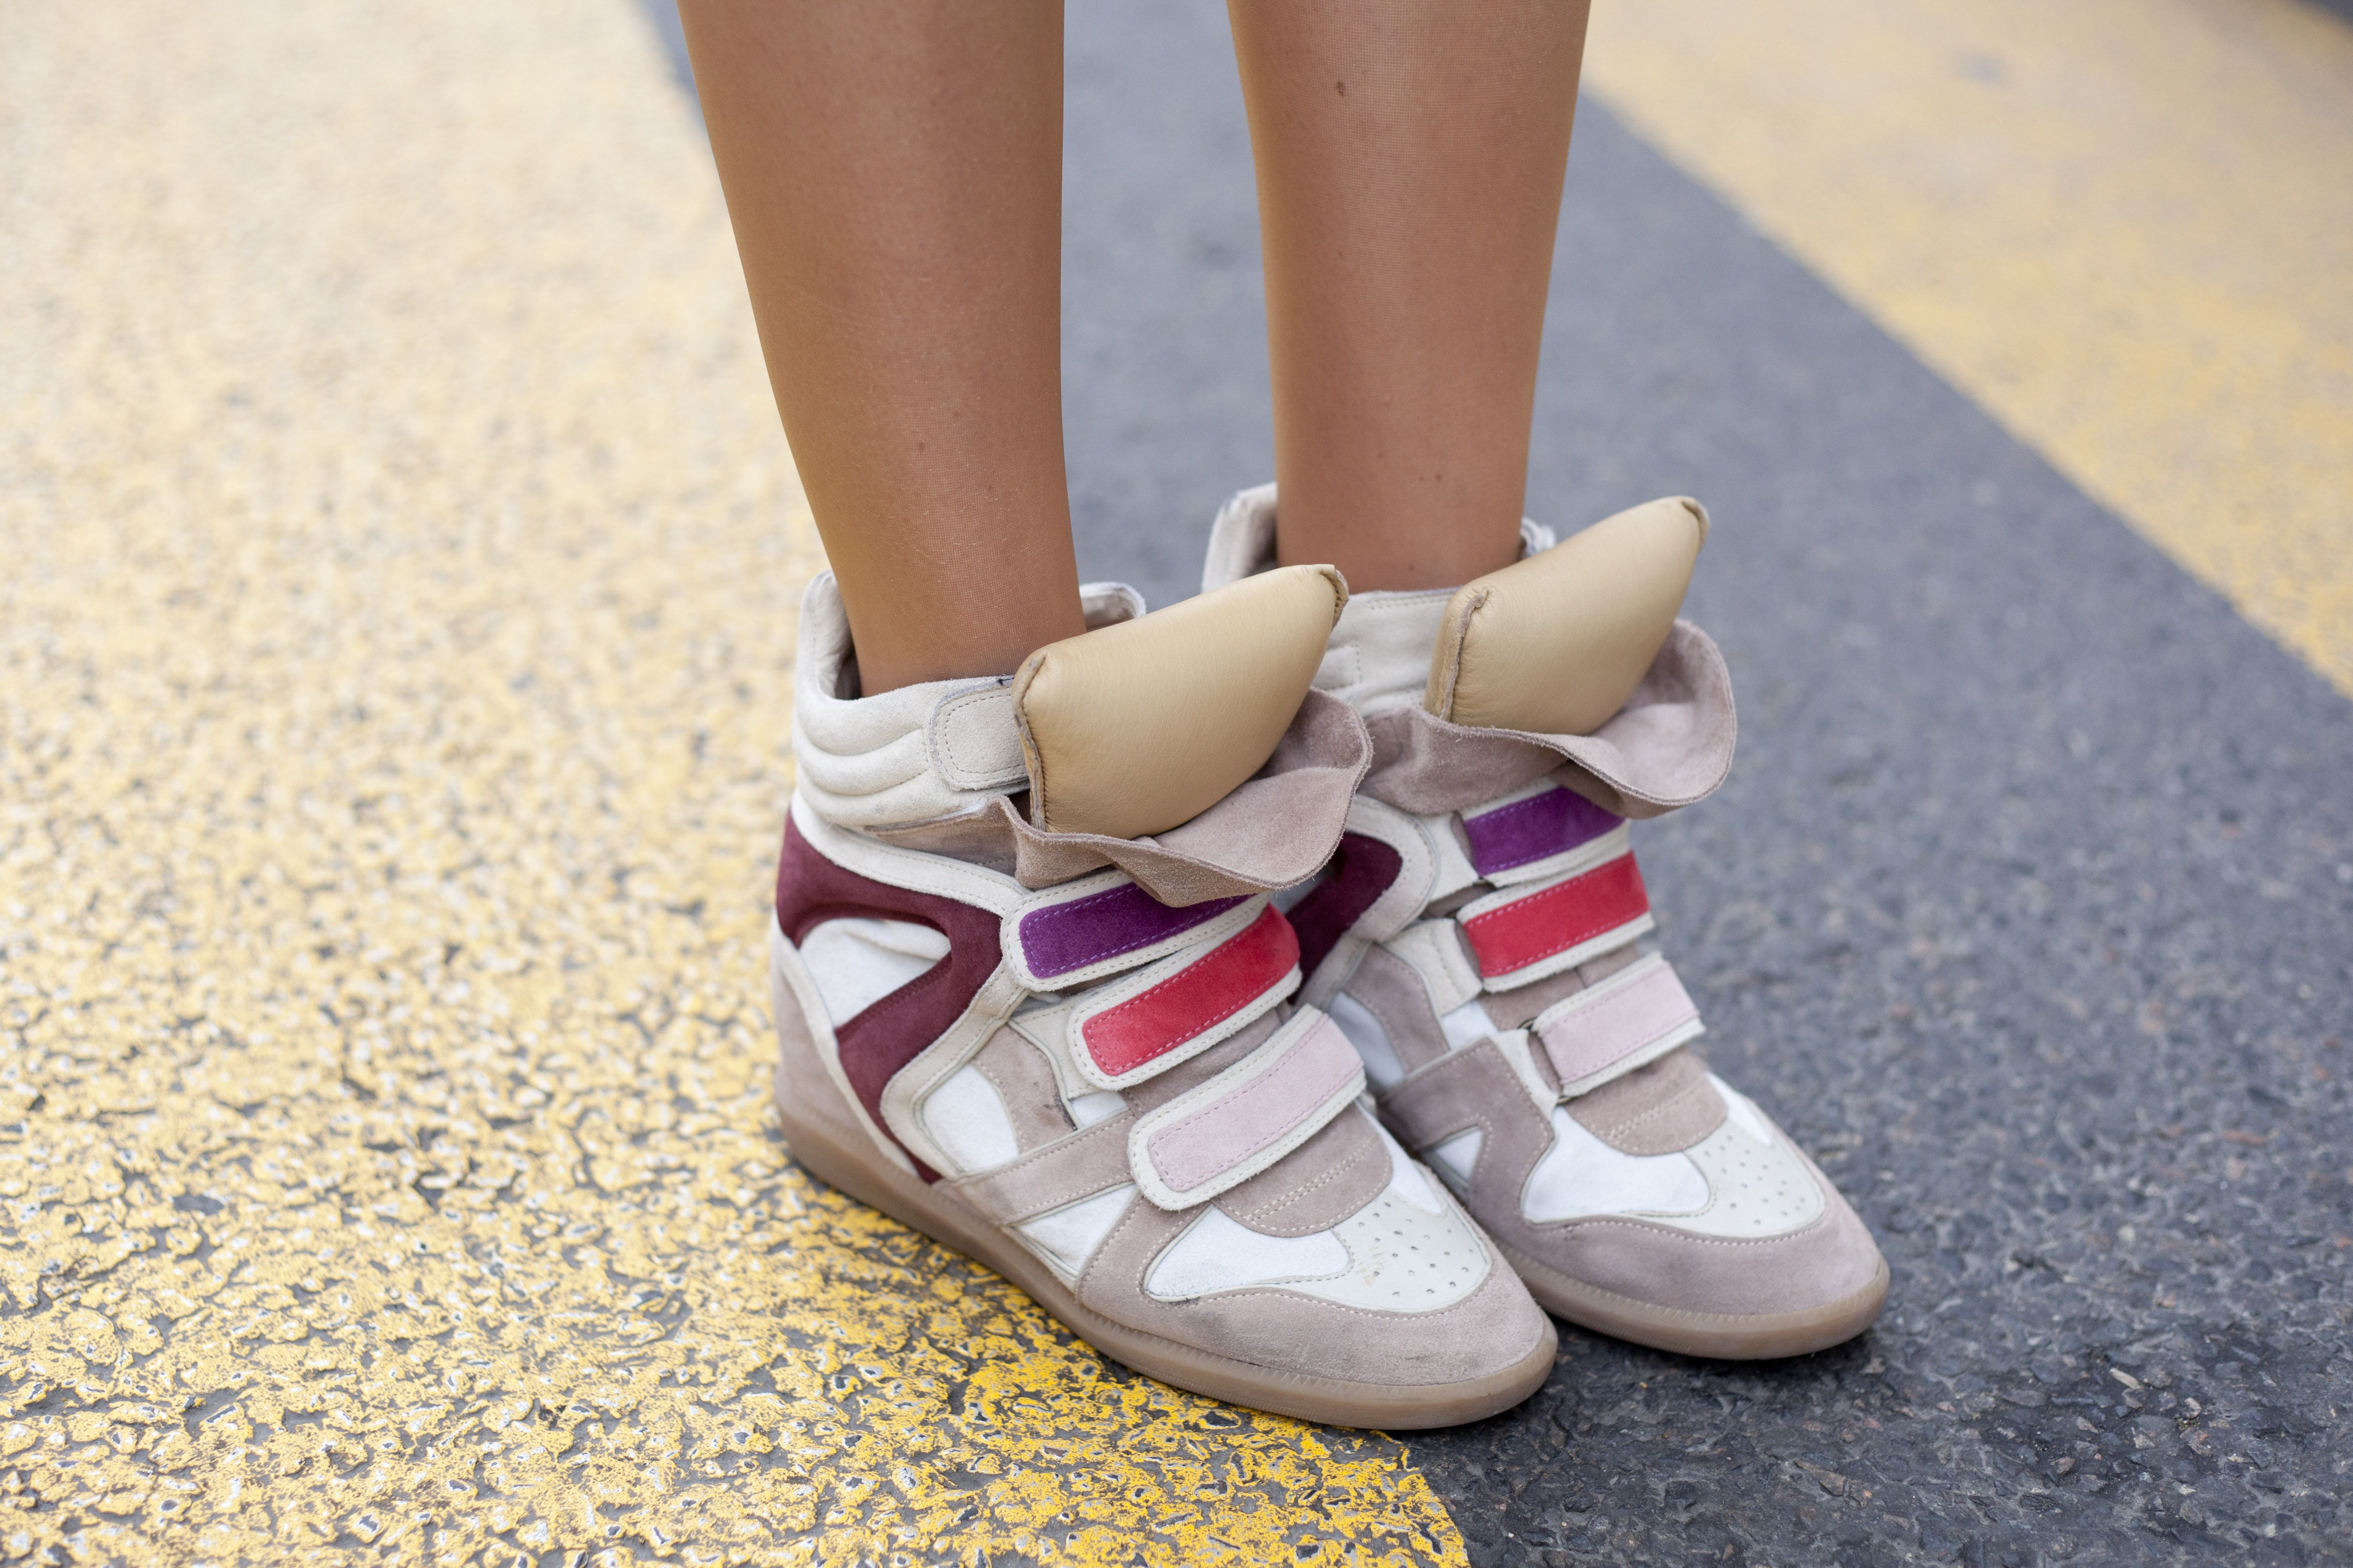 Isabel Marant relaunched her wedge sneaker